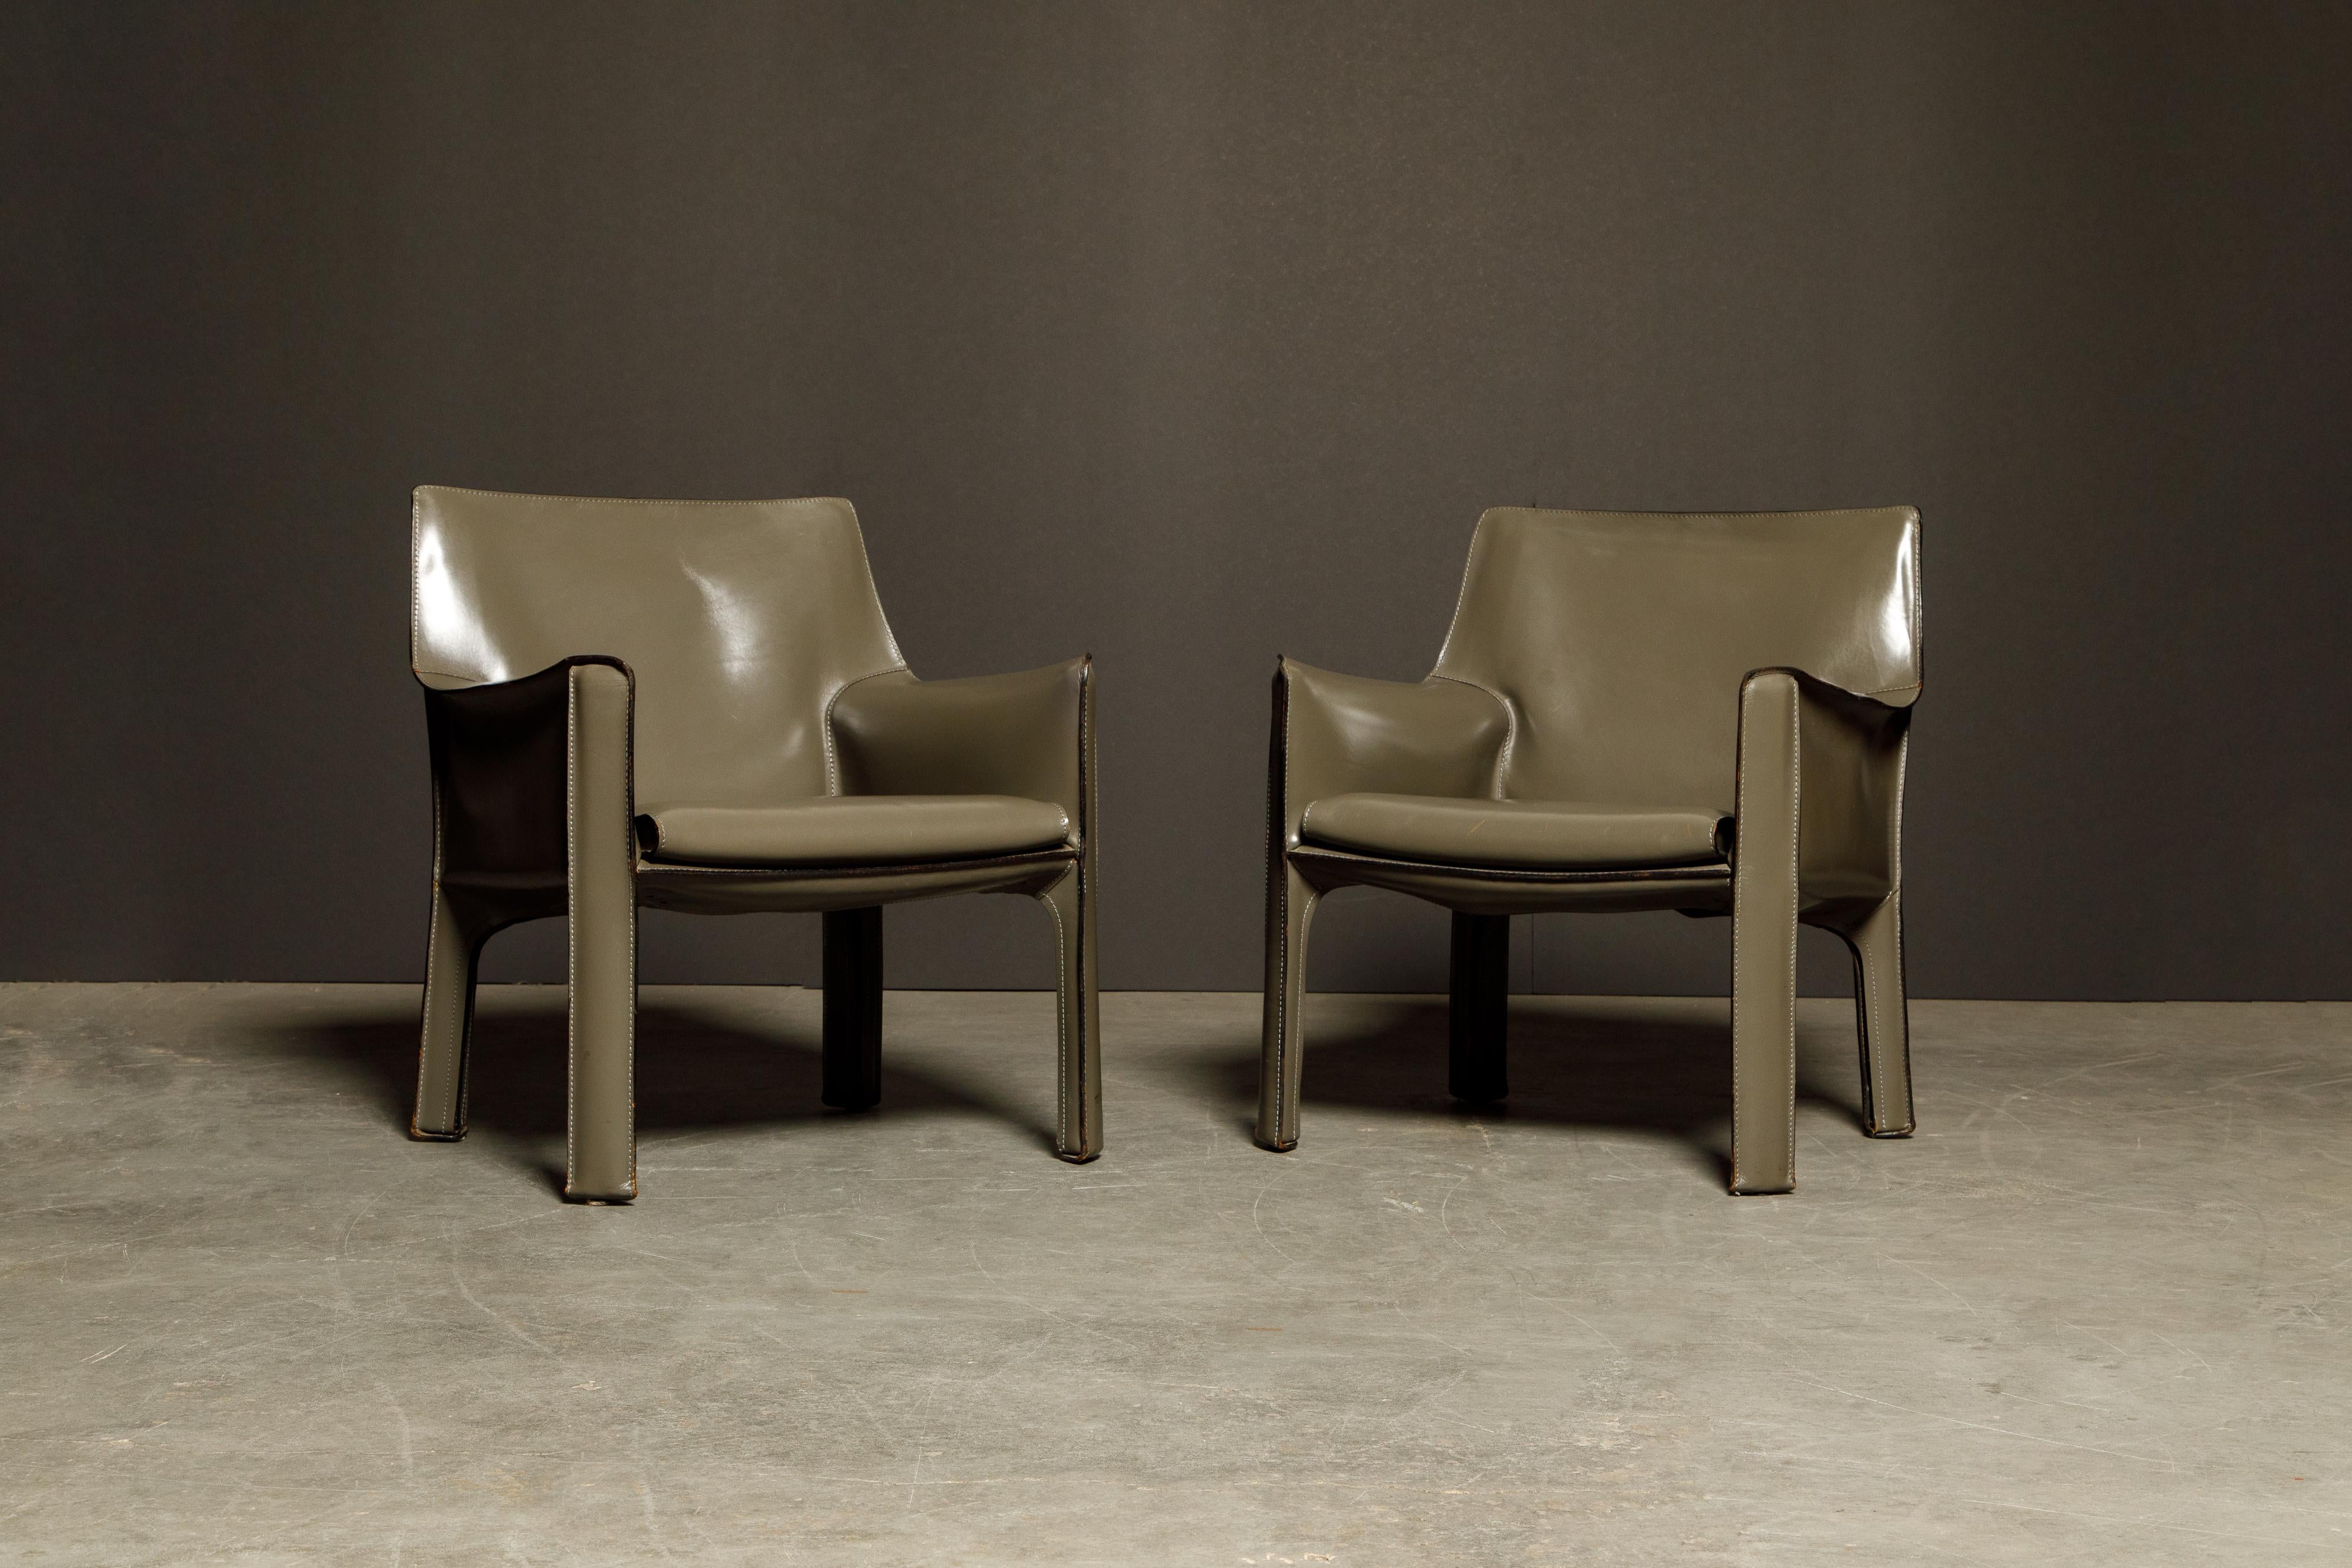 A beautiful pair of Mario Bellini Cab lounge chairs, Model #414, in exemplary condition, signed Cassina, designed in the 1970s. These fine examples of the cab line by Mario Bellini for Cassina are classic staples for luxury interior designers and